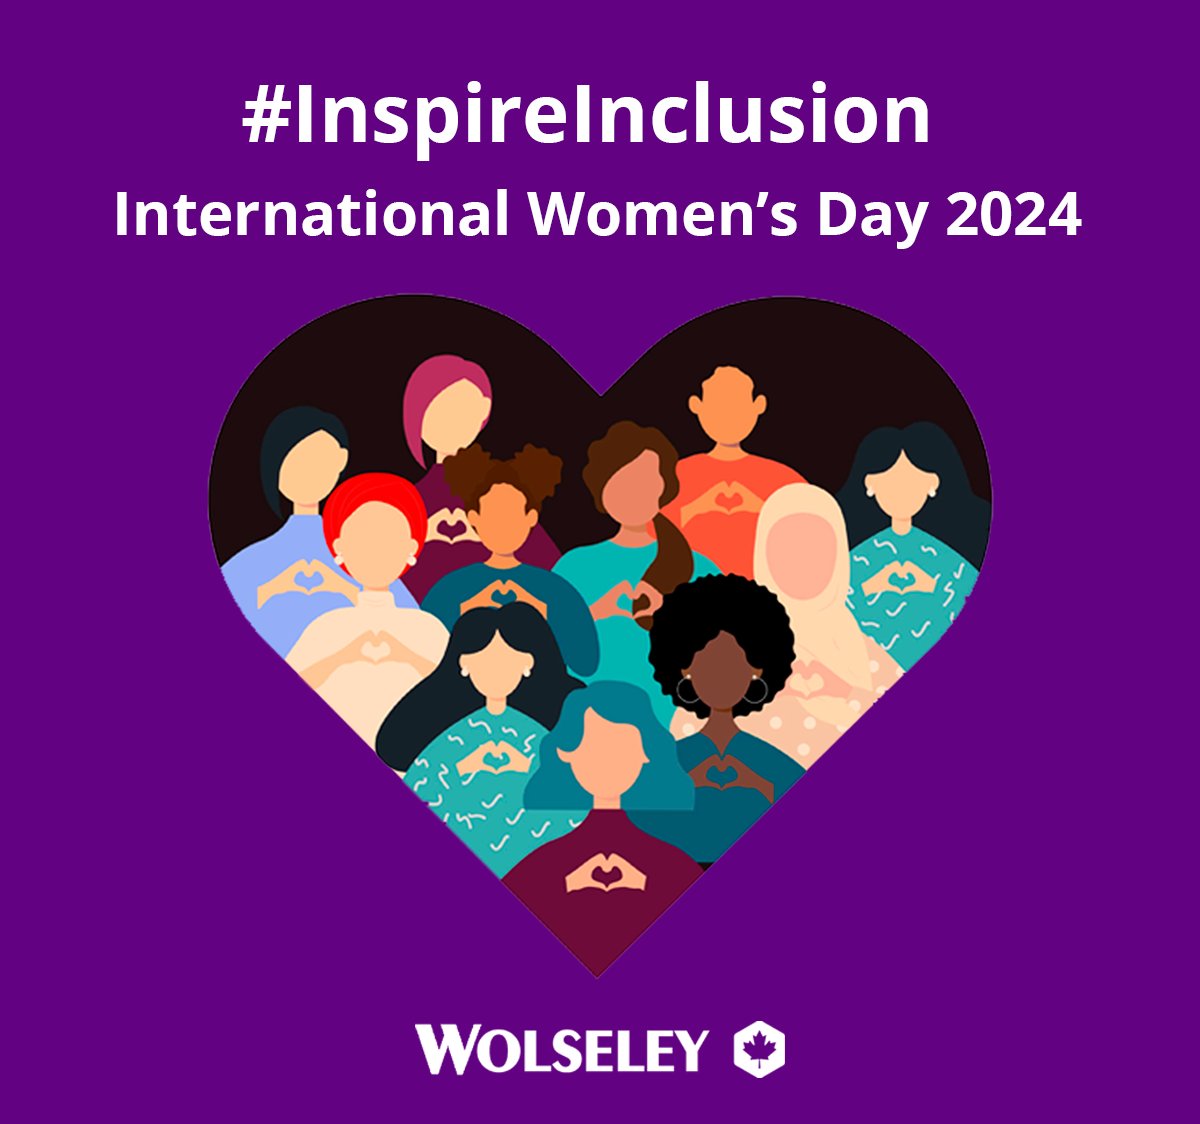 #InspireInclusion this International Women’s Day! It’s no question the impact a sense of belonging can have. That’s why, this International Women’s Day, we’re #InspiringInclusion and ensuring there is a sense of belonging and empowerment at Wolseley Canada. #iwd24